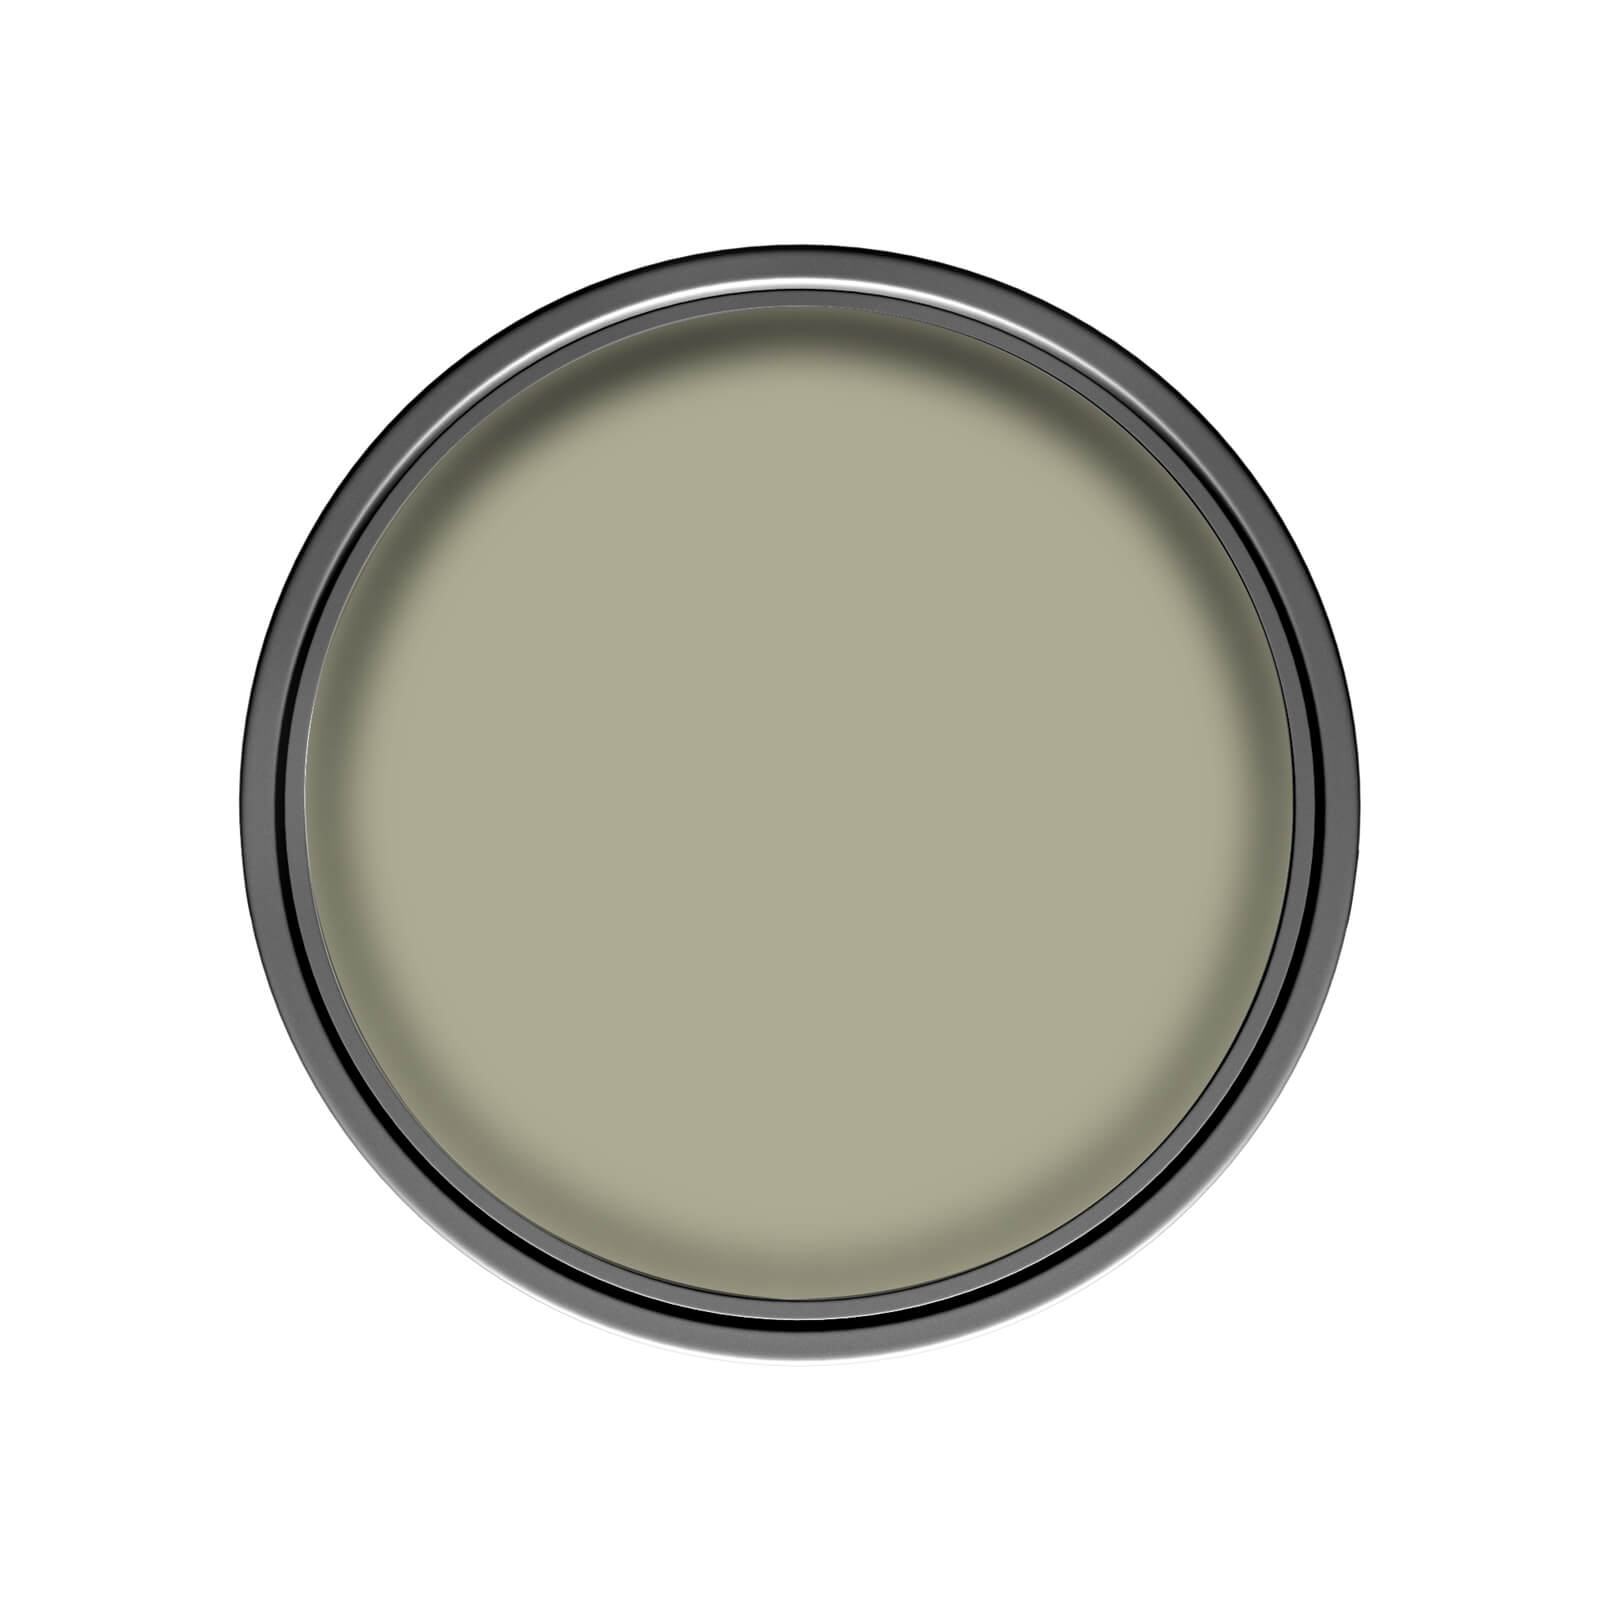 Dulux Silk Emulsion Paint Overtly Olive - 2.5L